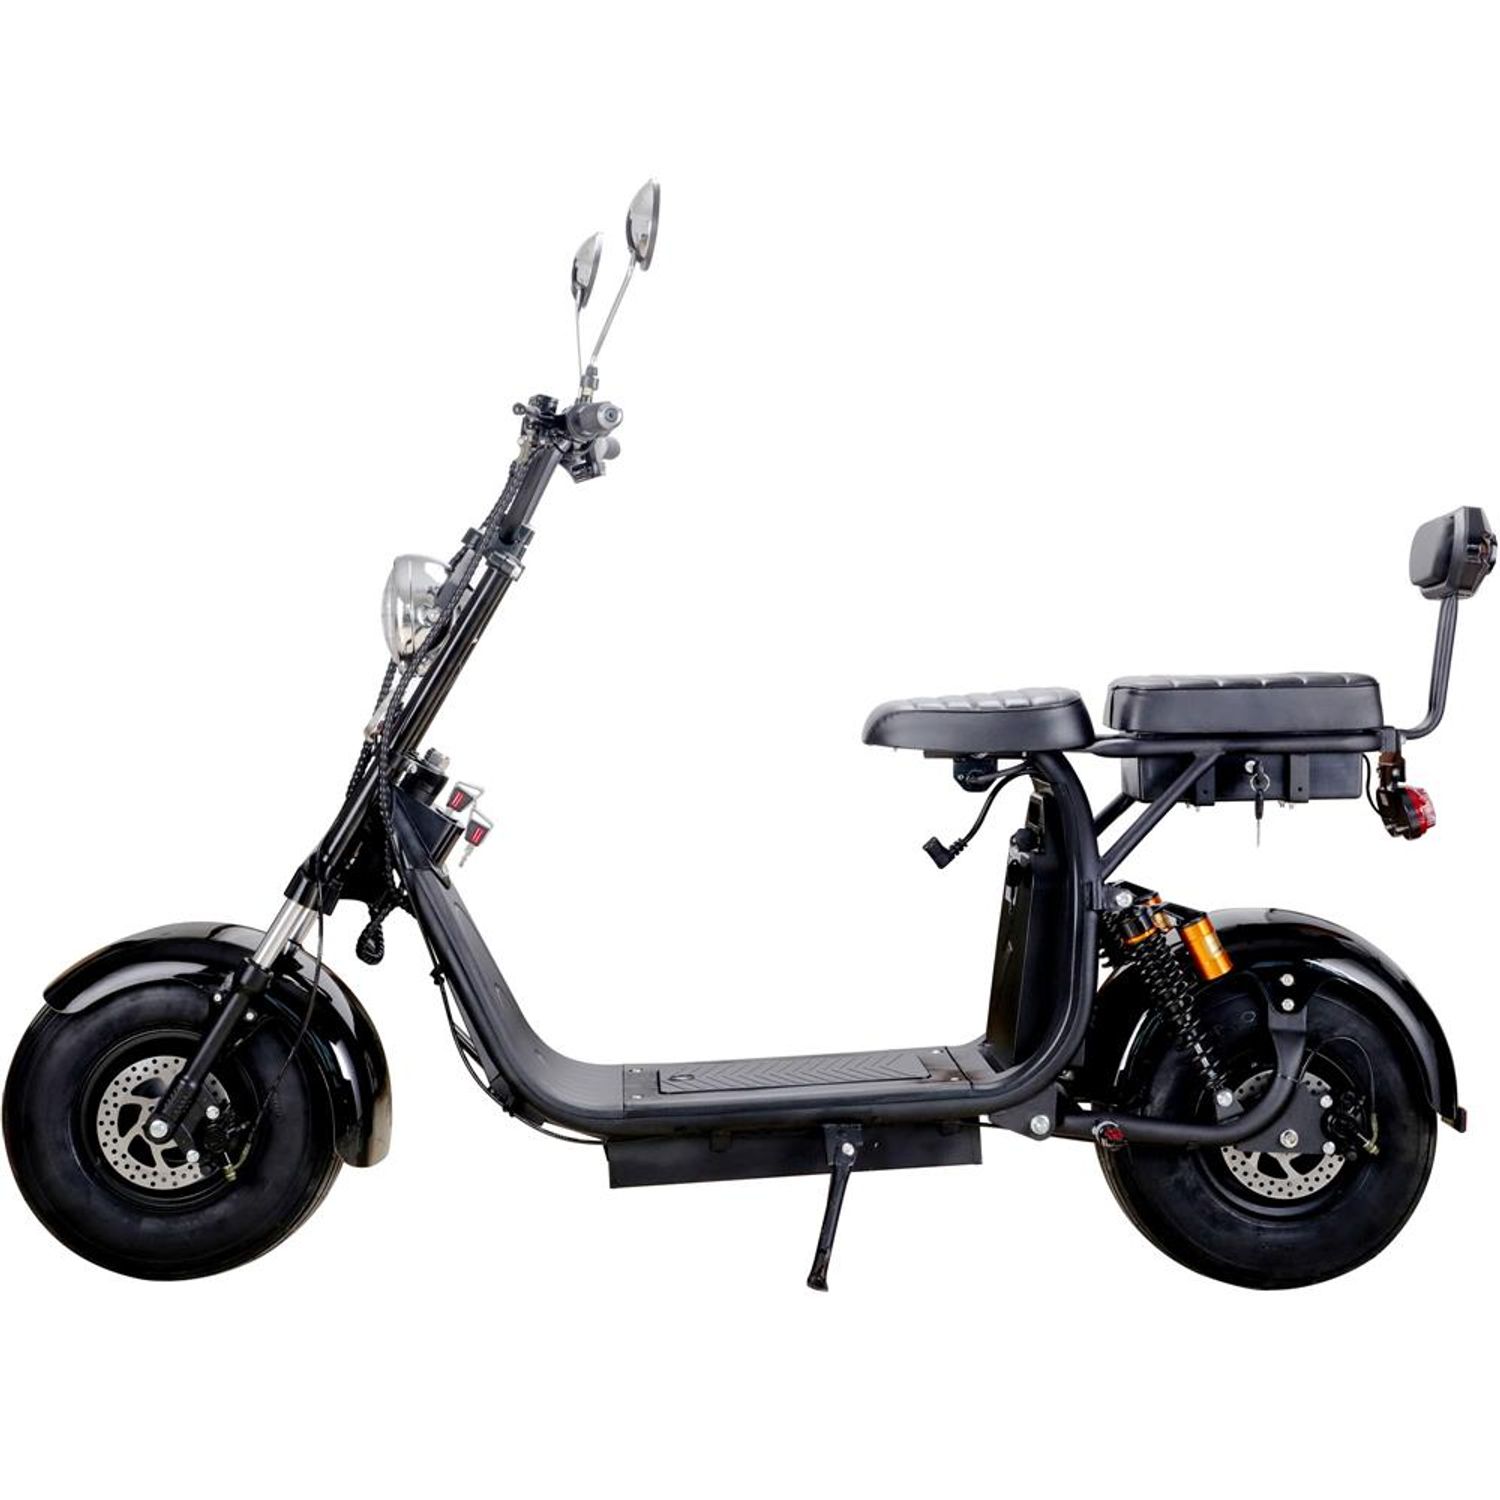 SAY YEAH K2 Black Electric Scooter 2000W 60V Top Speed 25mph Range Per Charge: 60 miles with both battery packs